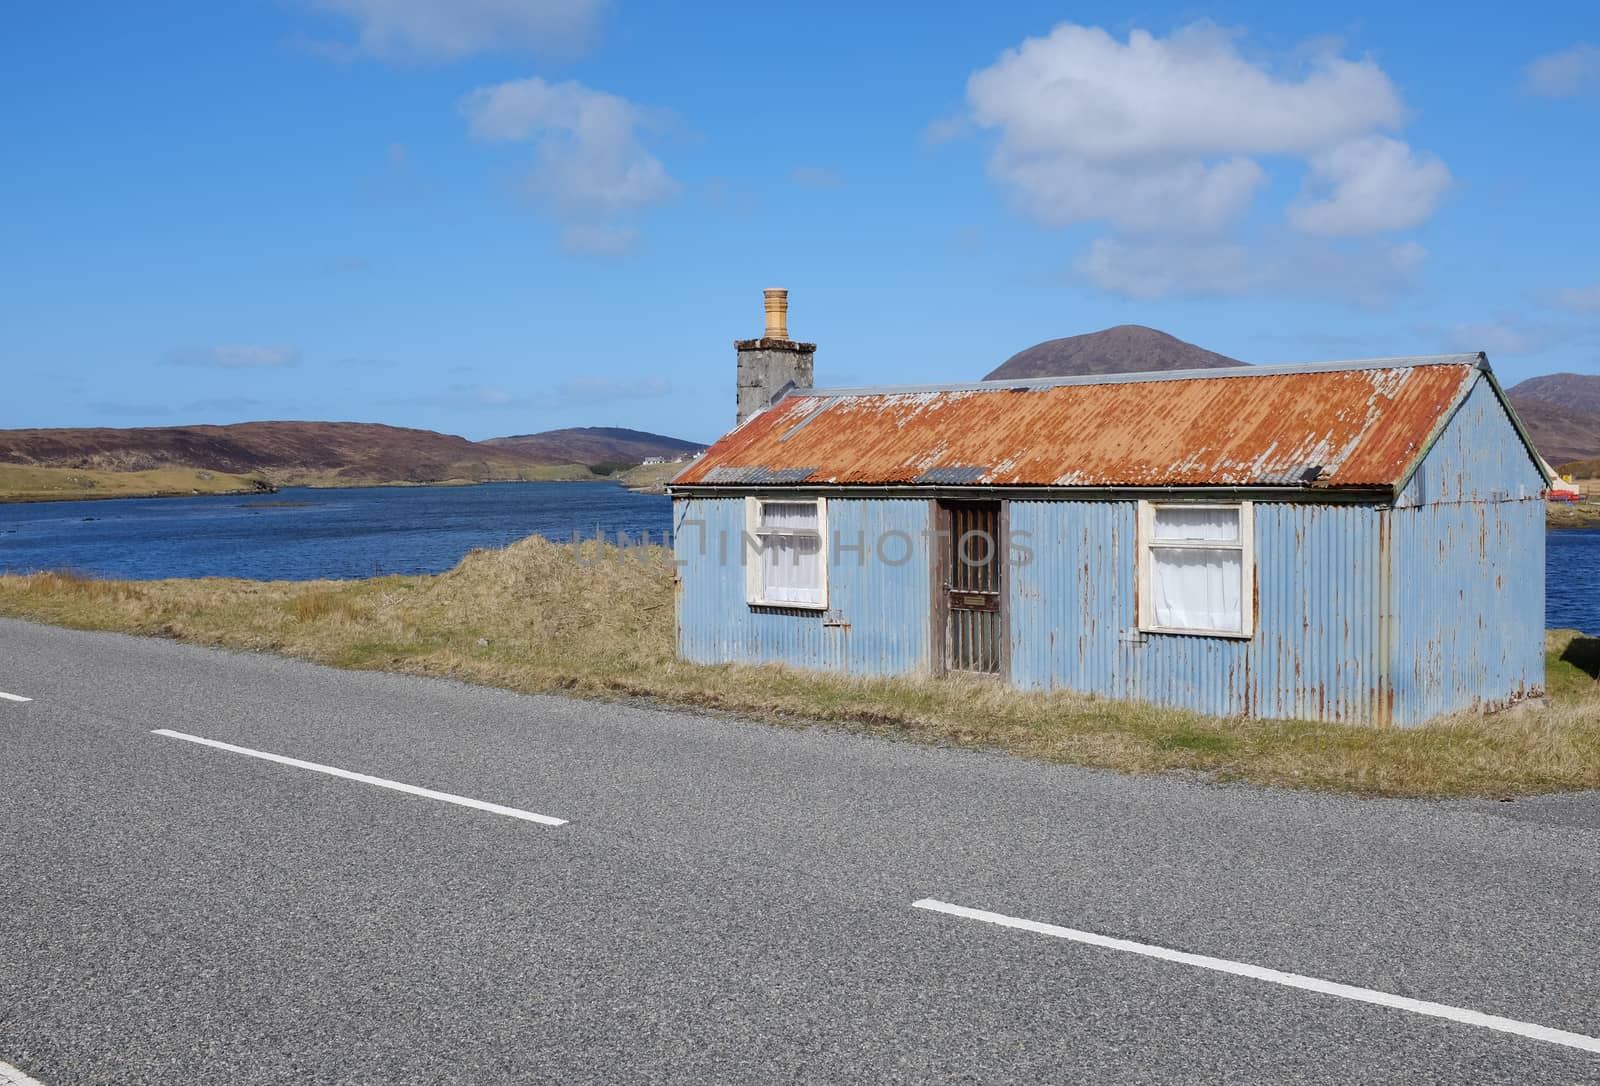 A derelict corrugated metal building on the side of the road with water and hills in the distance under a blue sky.